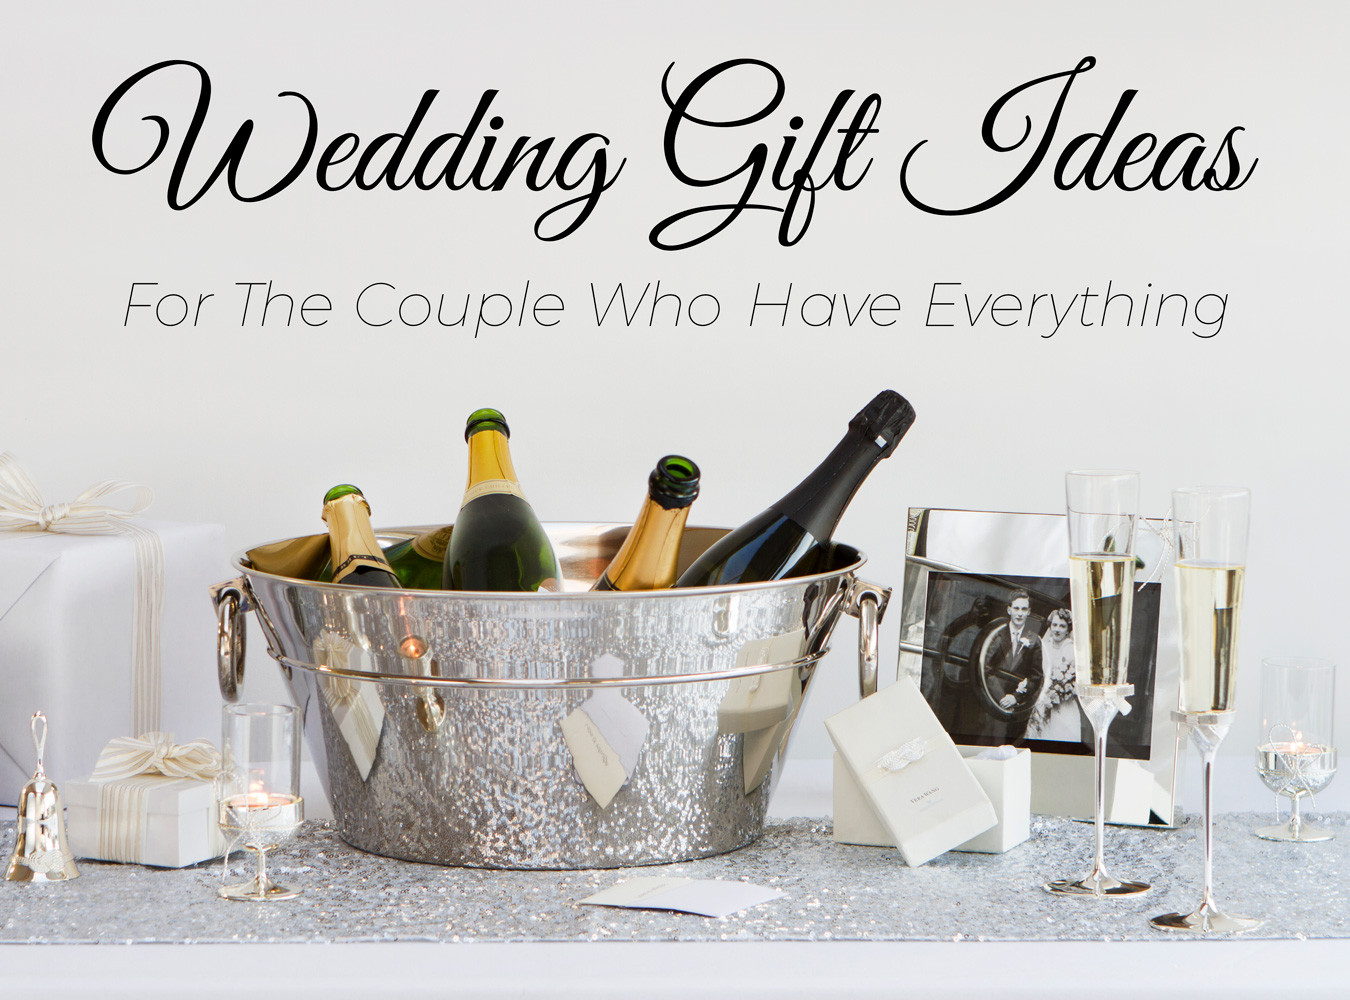 Wedding Gift Ideas For Older Couple Second Marriage
 5 Wedding Gift Ideas for the Couple Who Have Everything